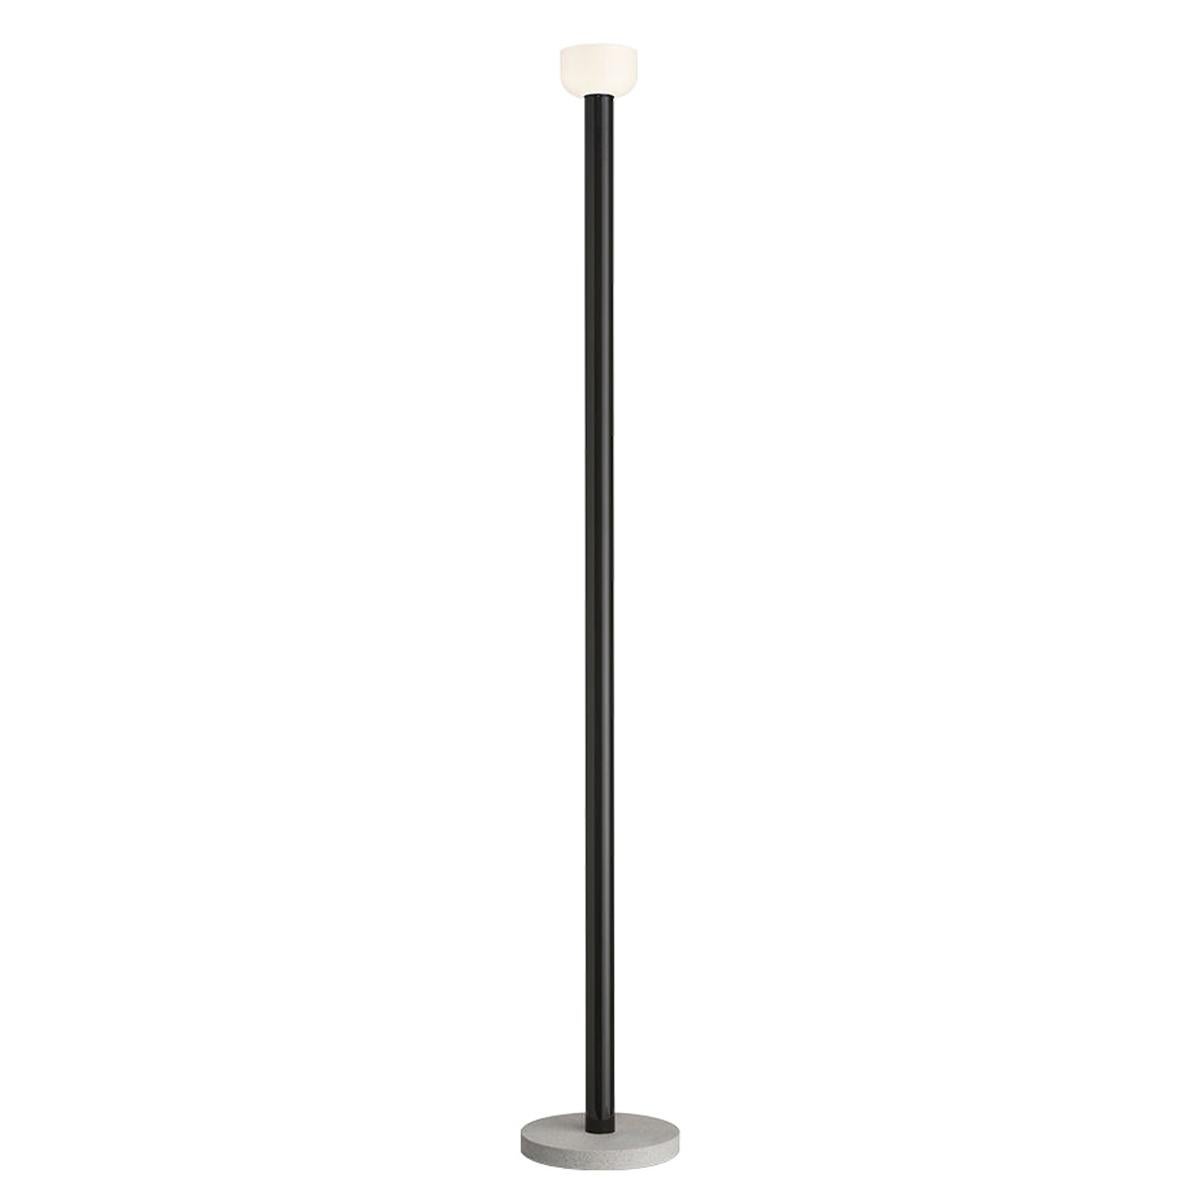 Flos Bellhop Floor Lamp in Brown Body with White Diffuser